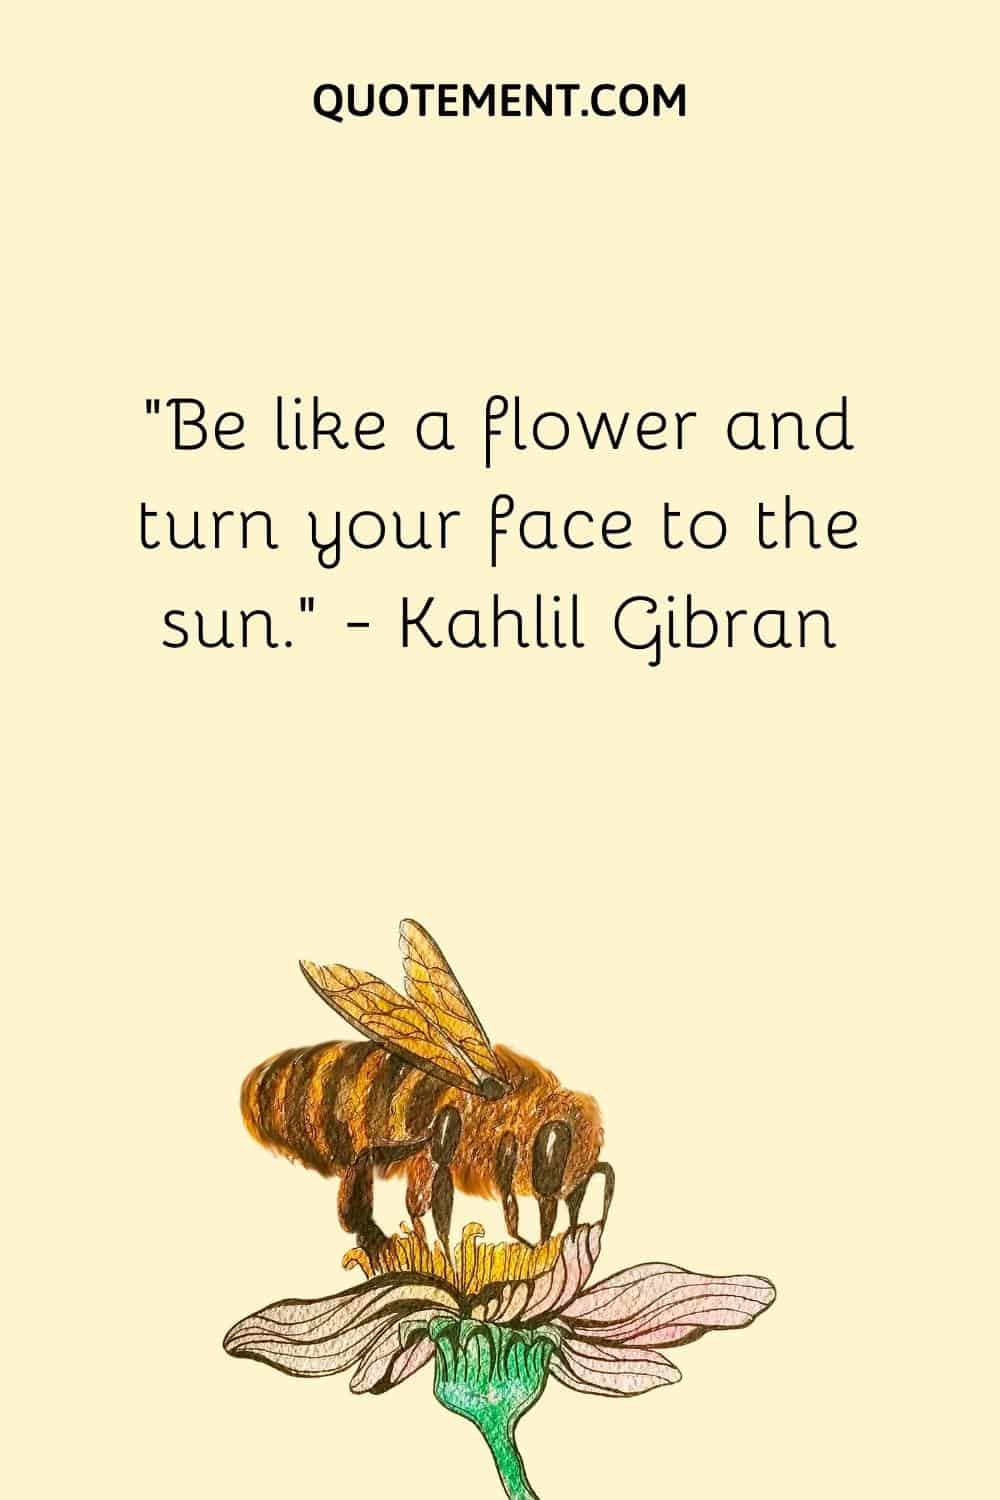 “Be like a flower and turn your face to the sun.” — Kahlil Gibran